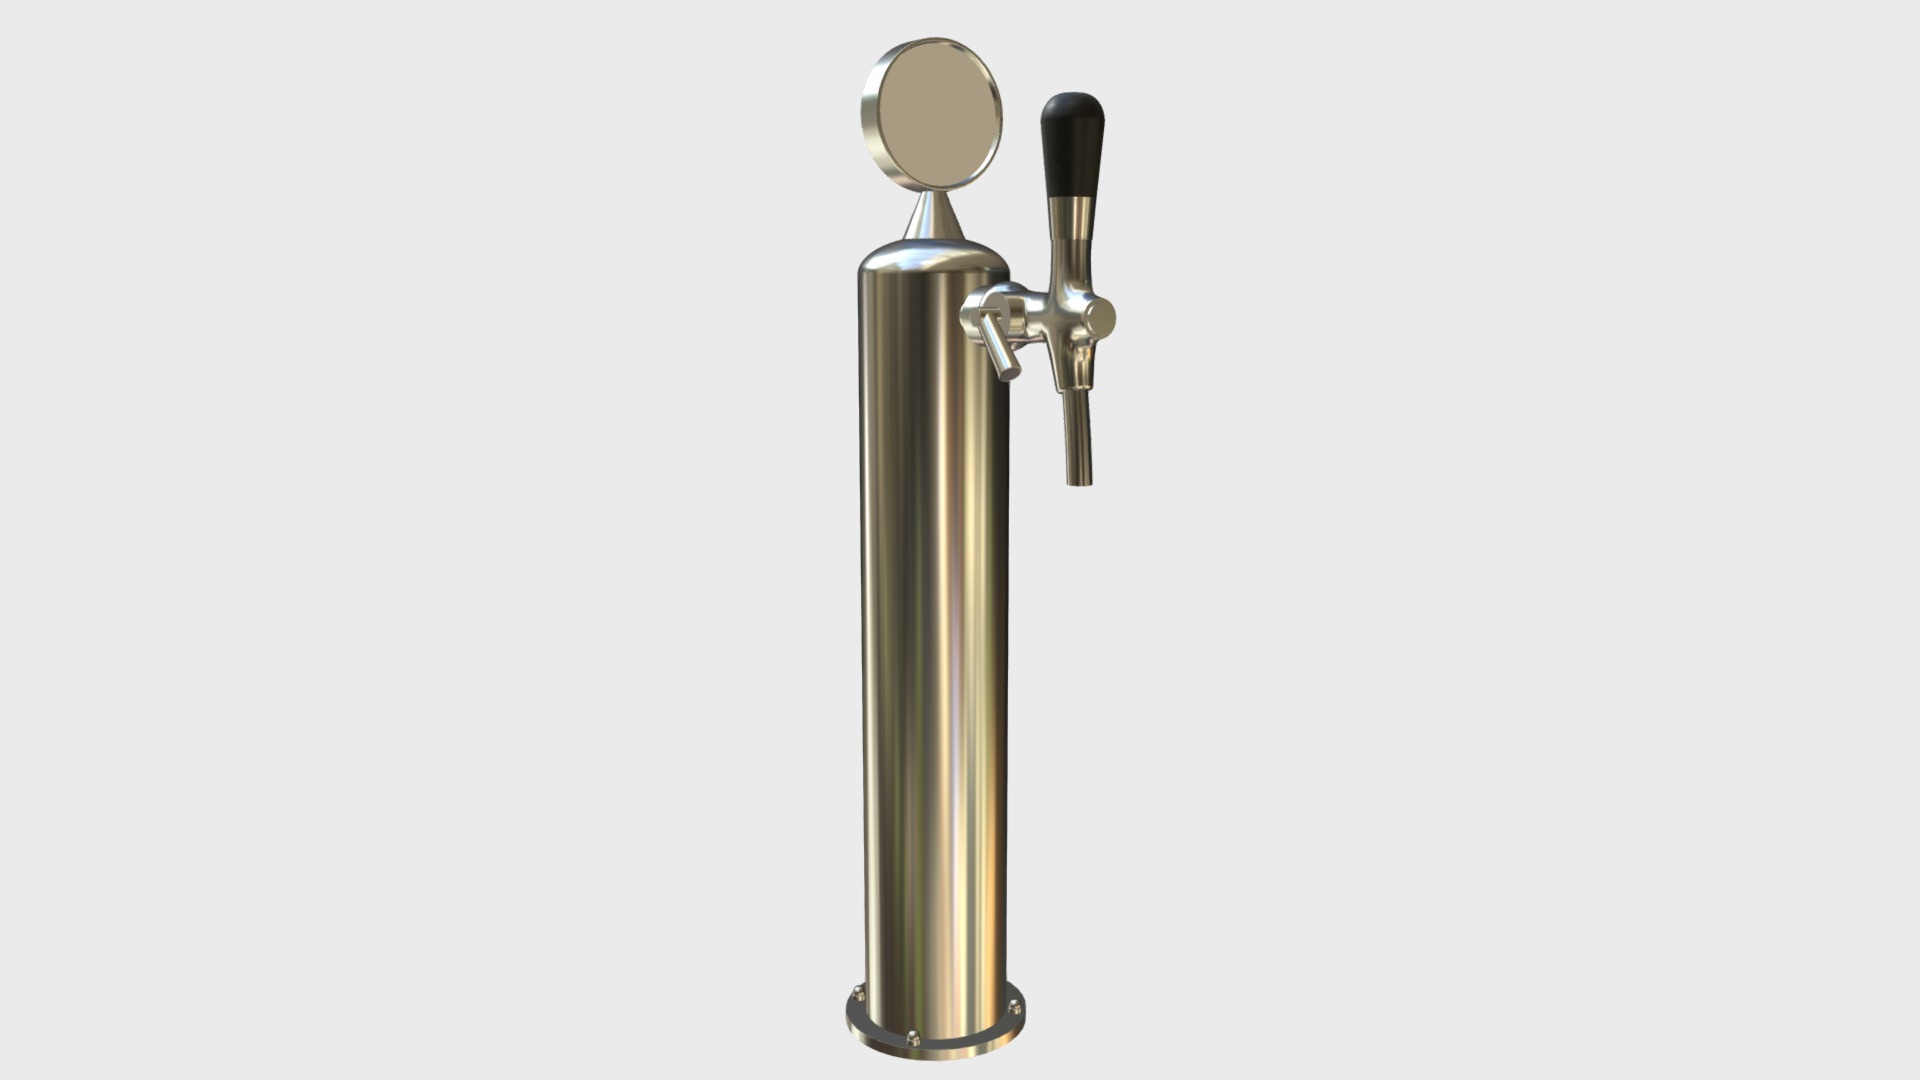 3D model Single beer tap - This is a 3D model of the Single beer tap. The 3D model is about a silver and black metal object.